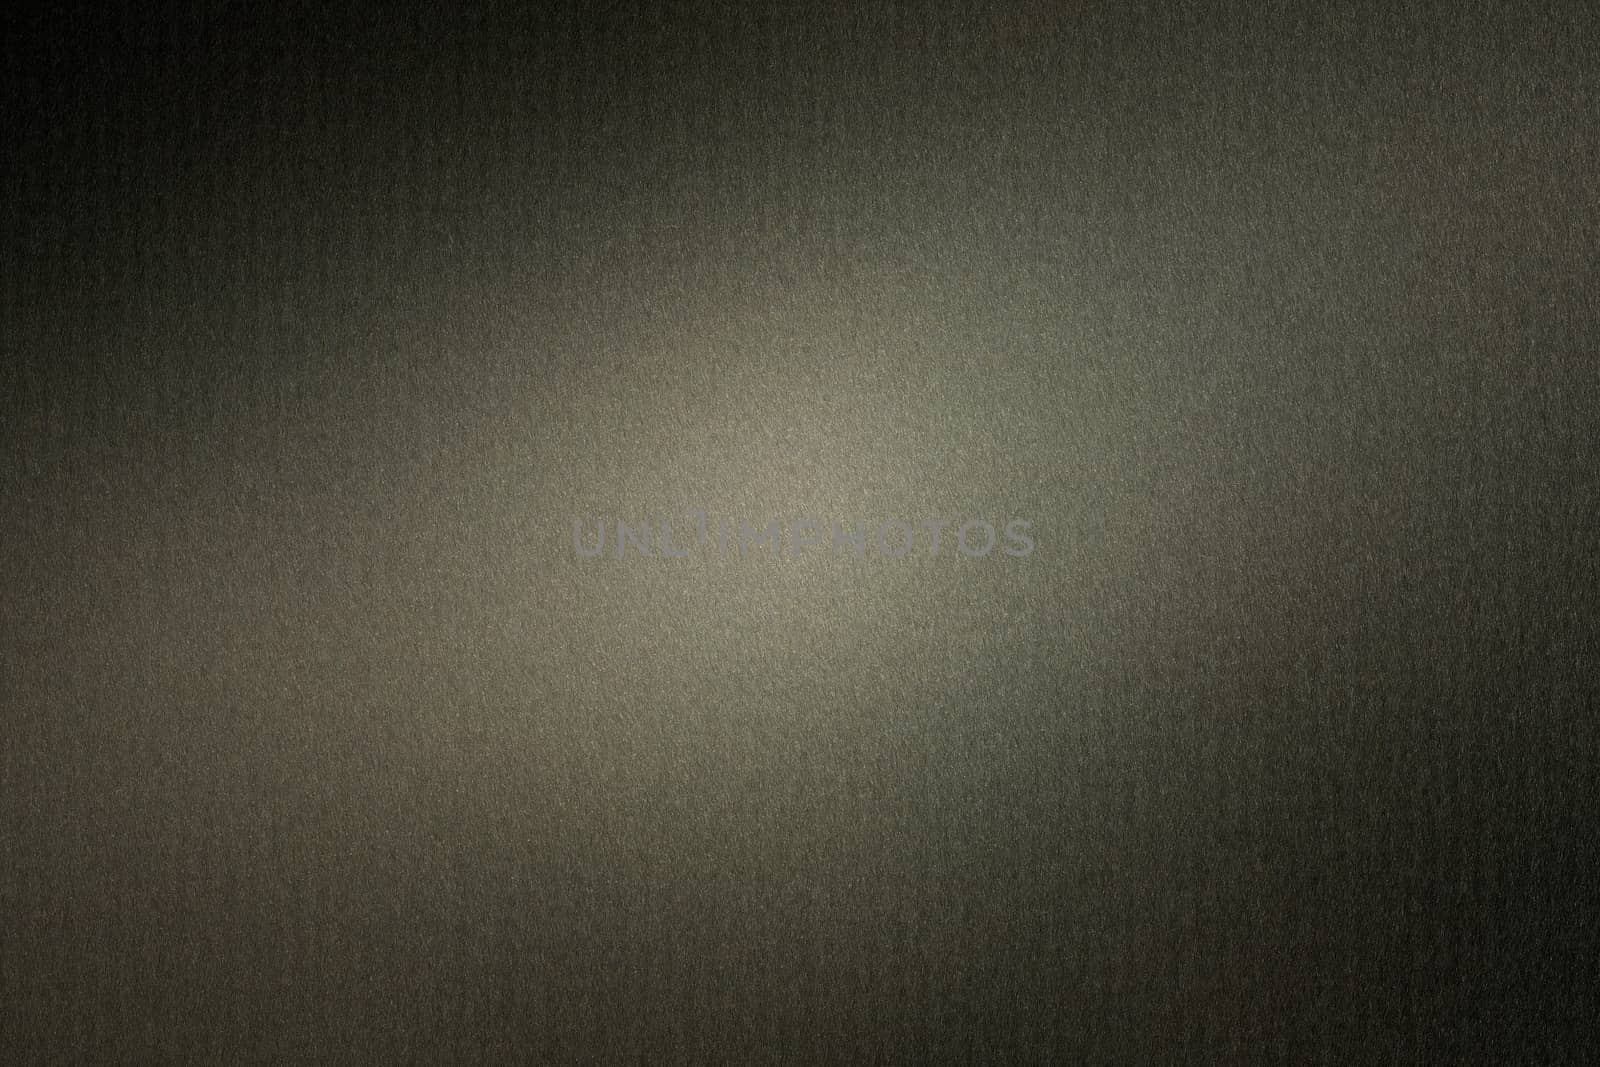 Brushed black metal board surface, abstract texture background